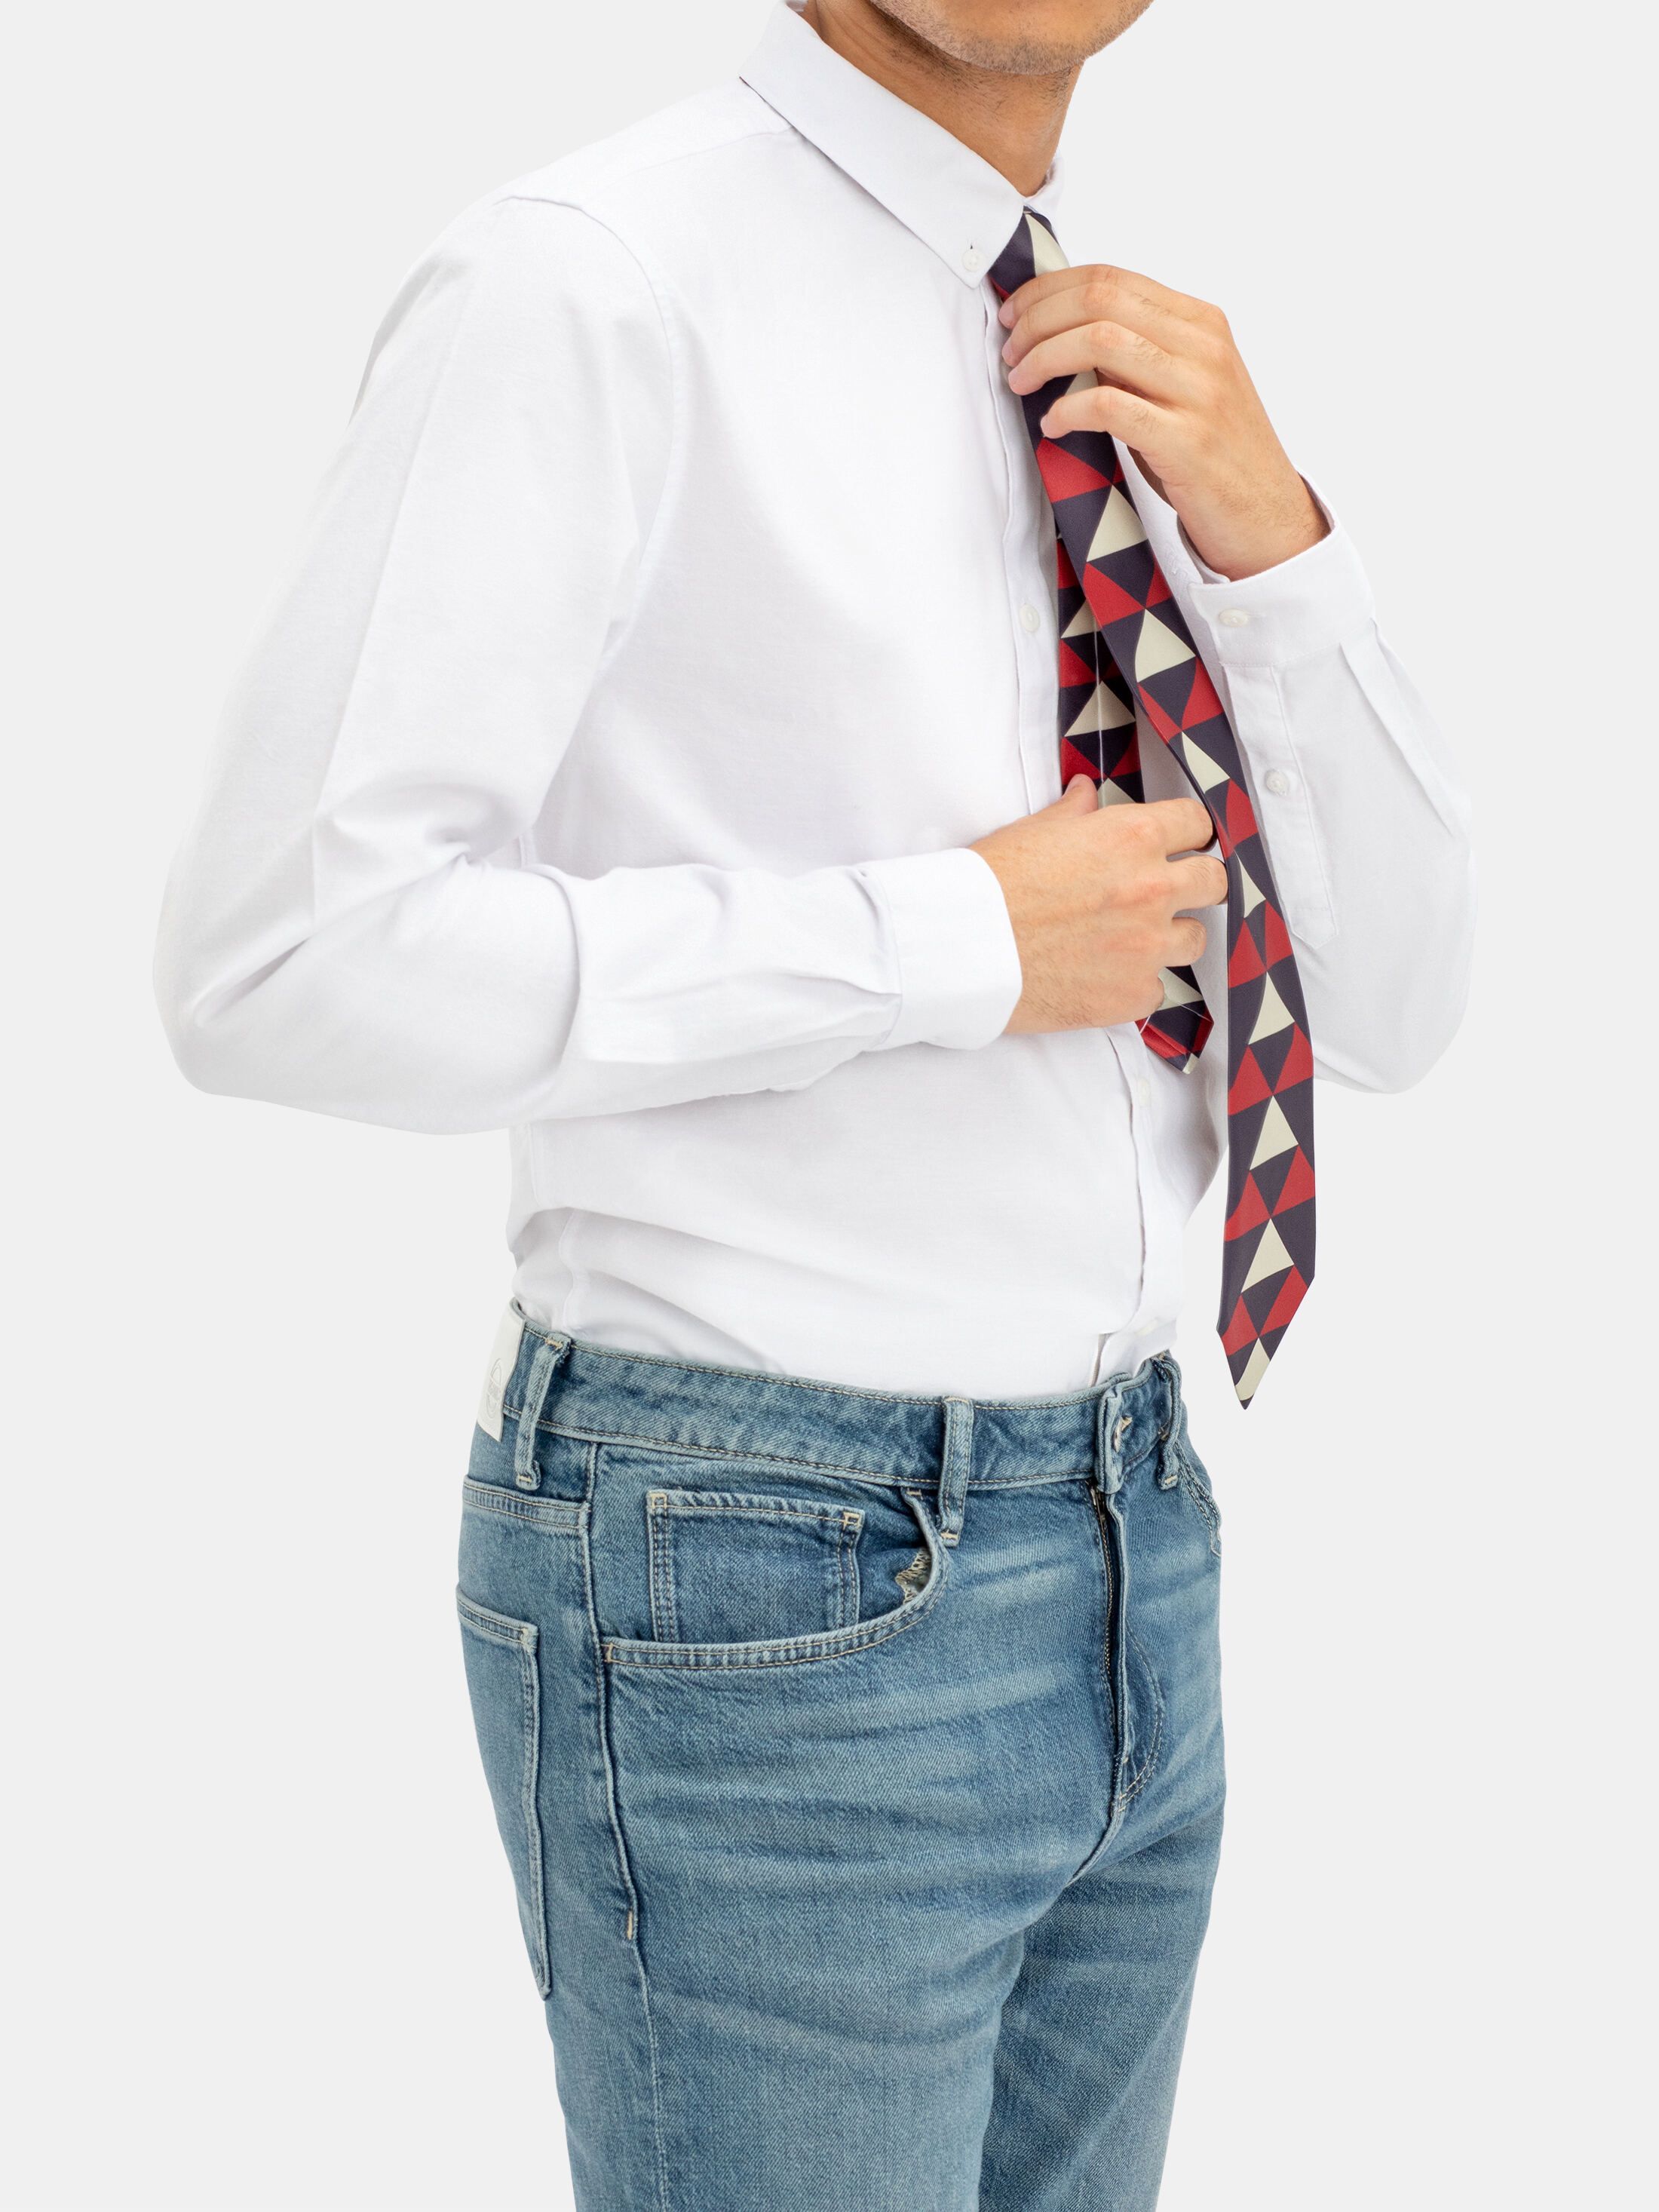 Skinny or wide personalized ties